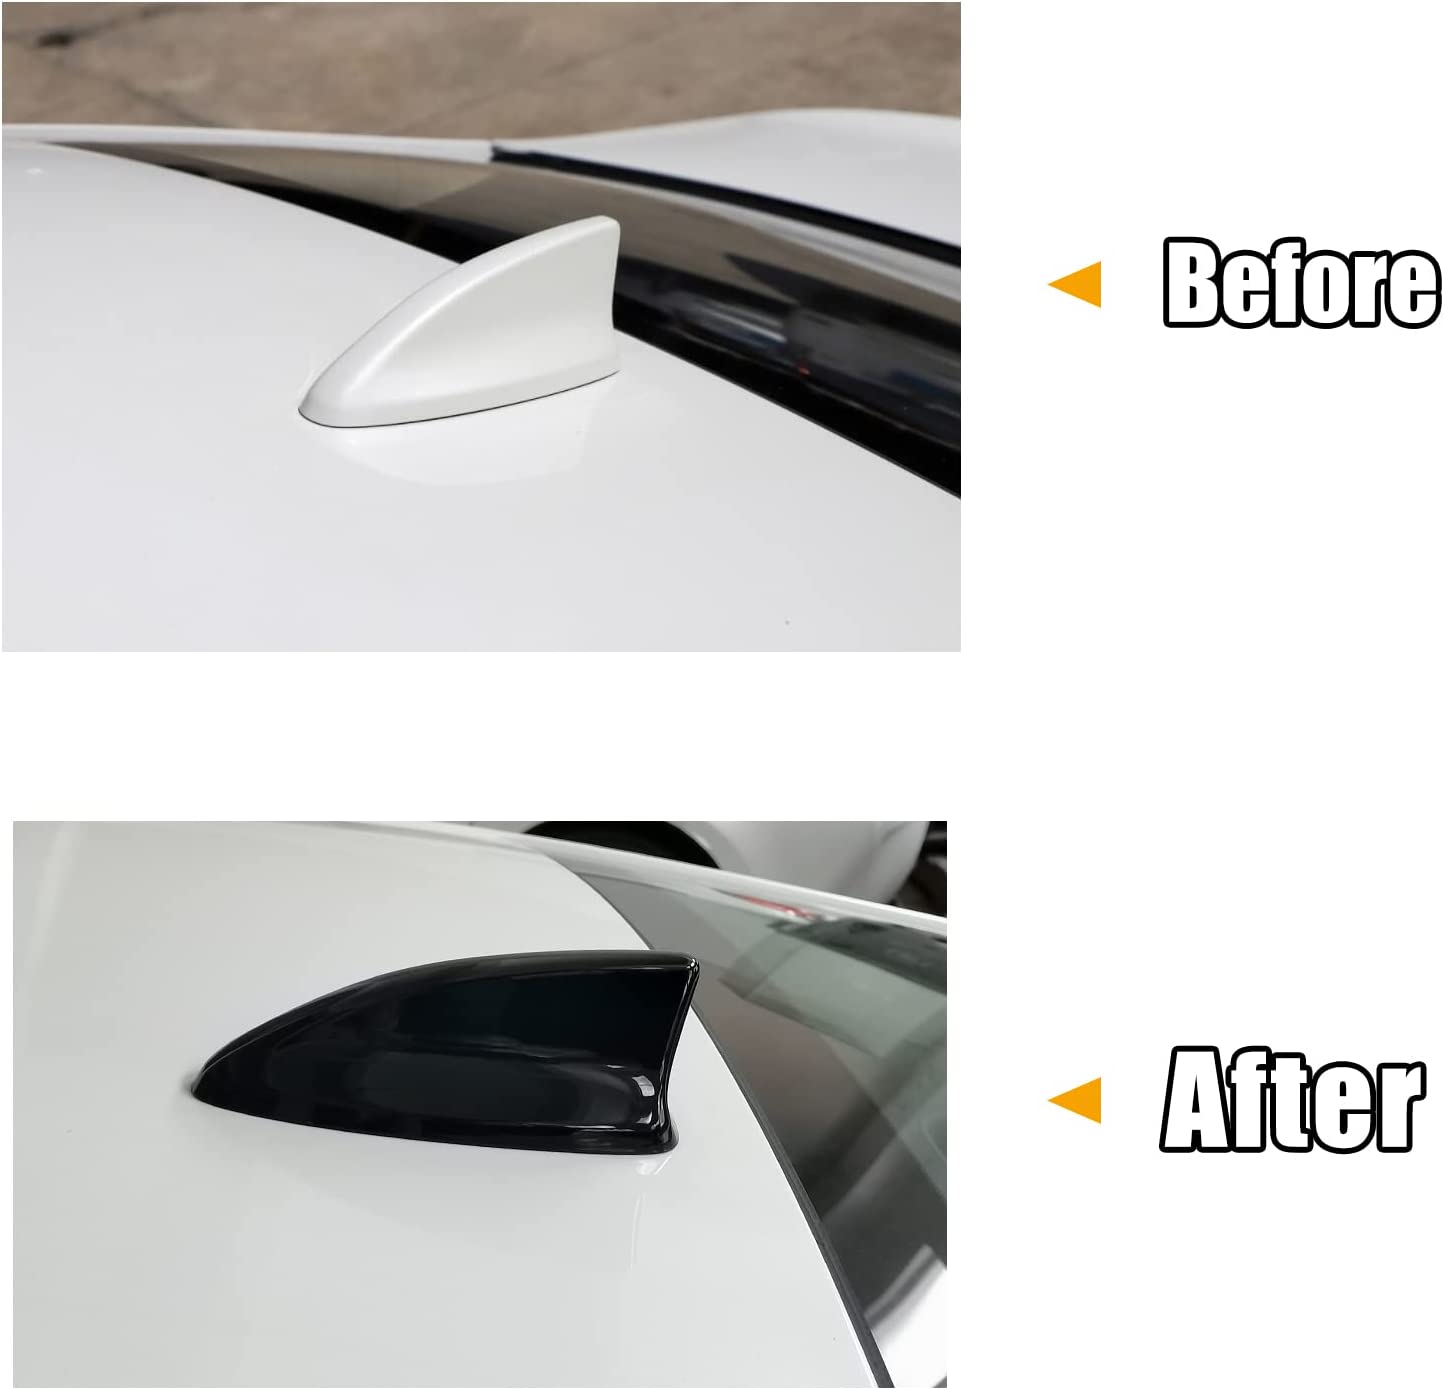 11th Gen Civic Compatible with Honda Civic 2022 2023 Accessories Auto Car Shark Fin Antenna Roof Aerial Cover Trim Exterior Decoration Sticker - Glossy Black - Delicate Leather